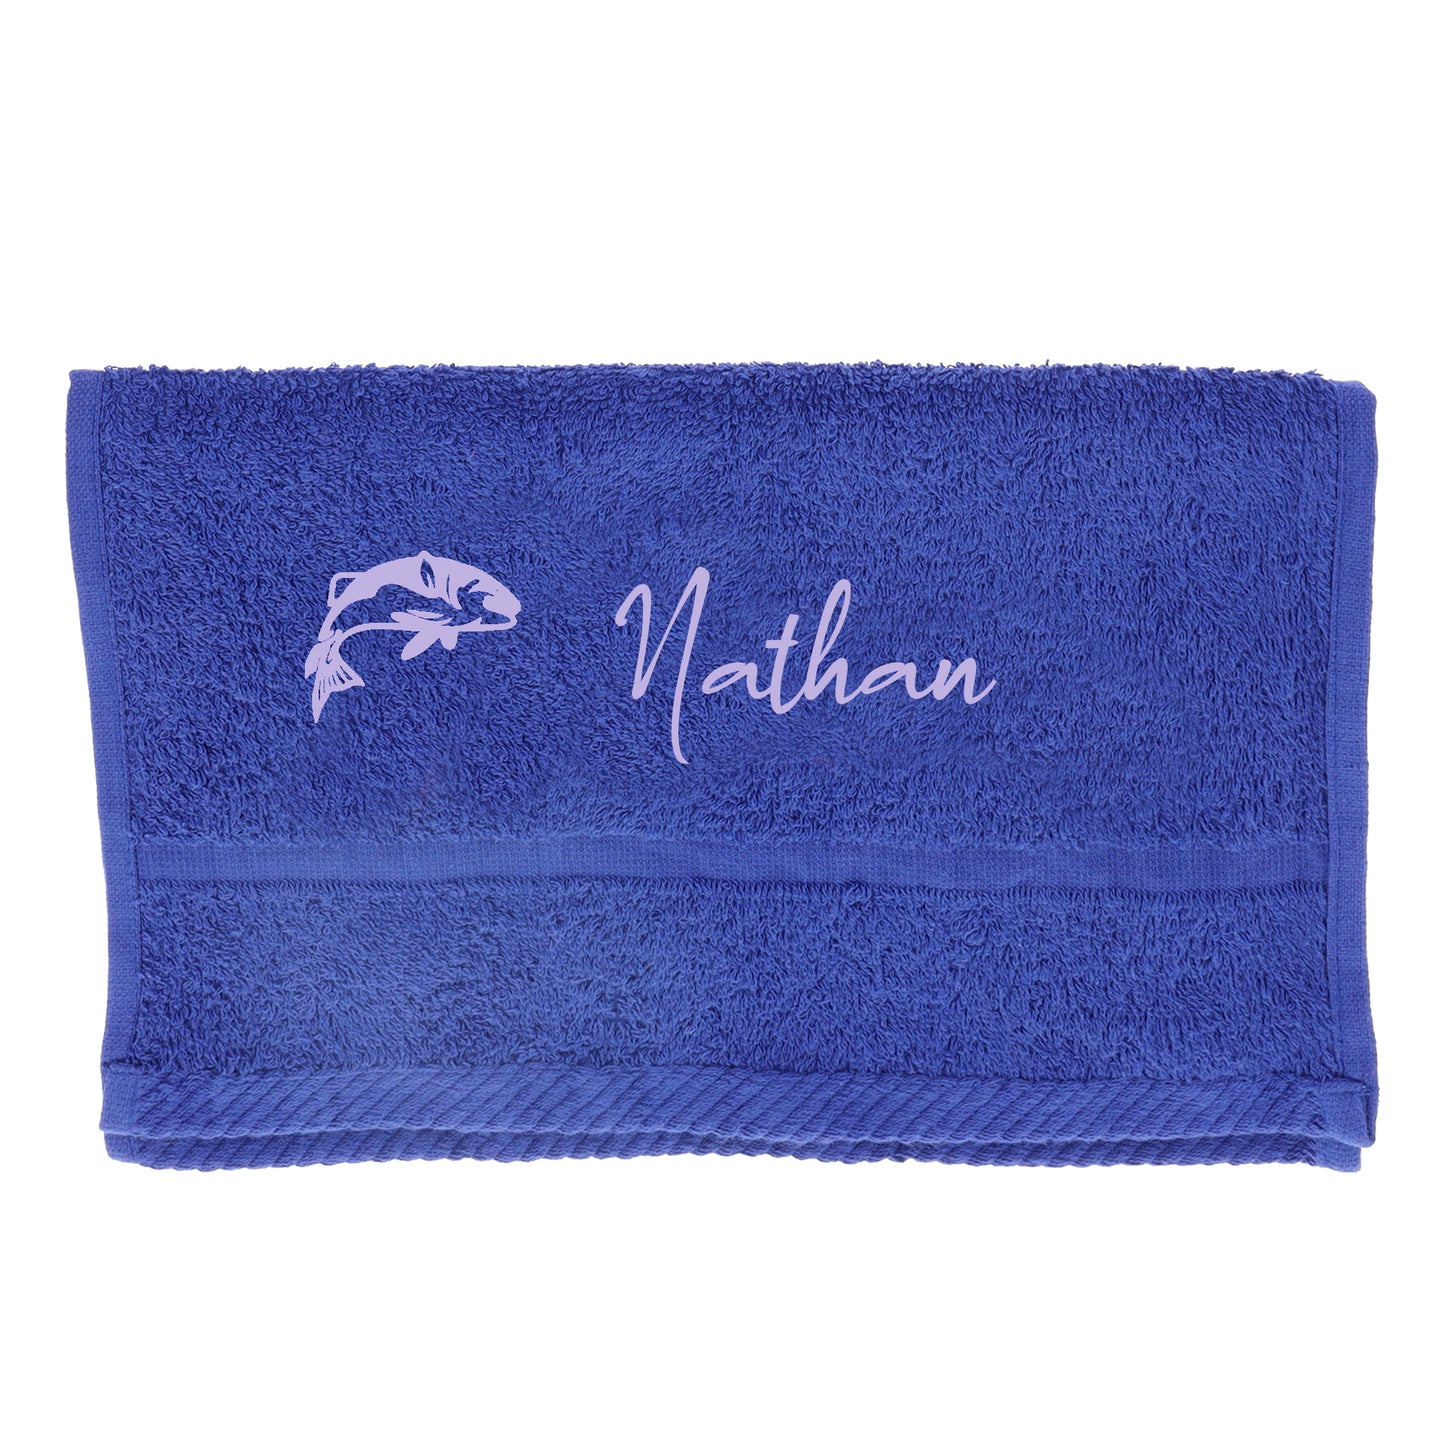 Personalised Embroidered Fishing Towel  - Always Looking Good - Royal Blue  